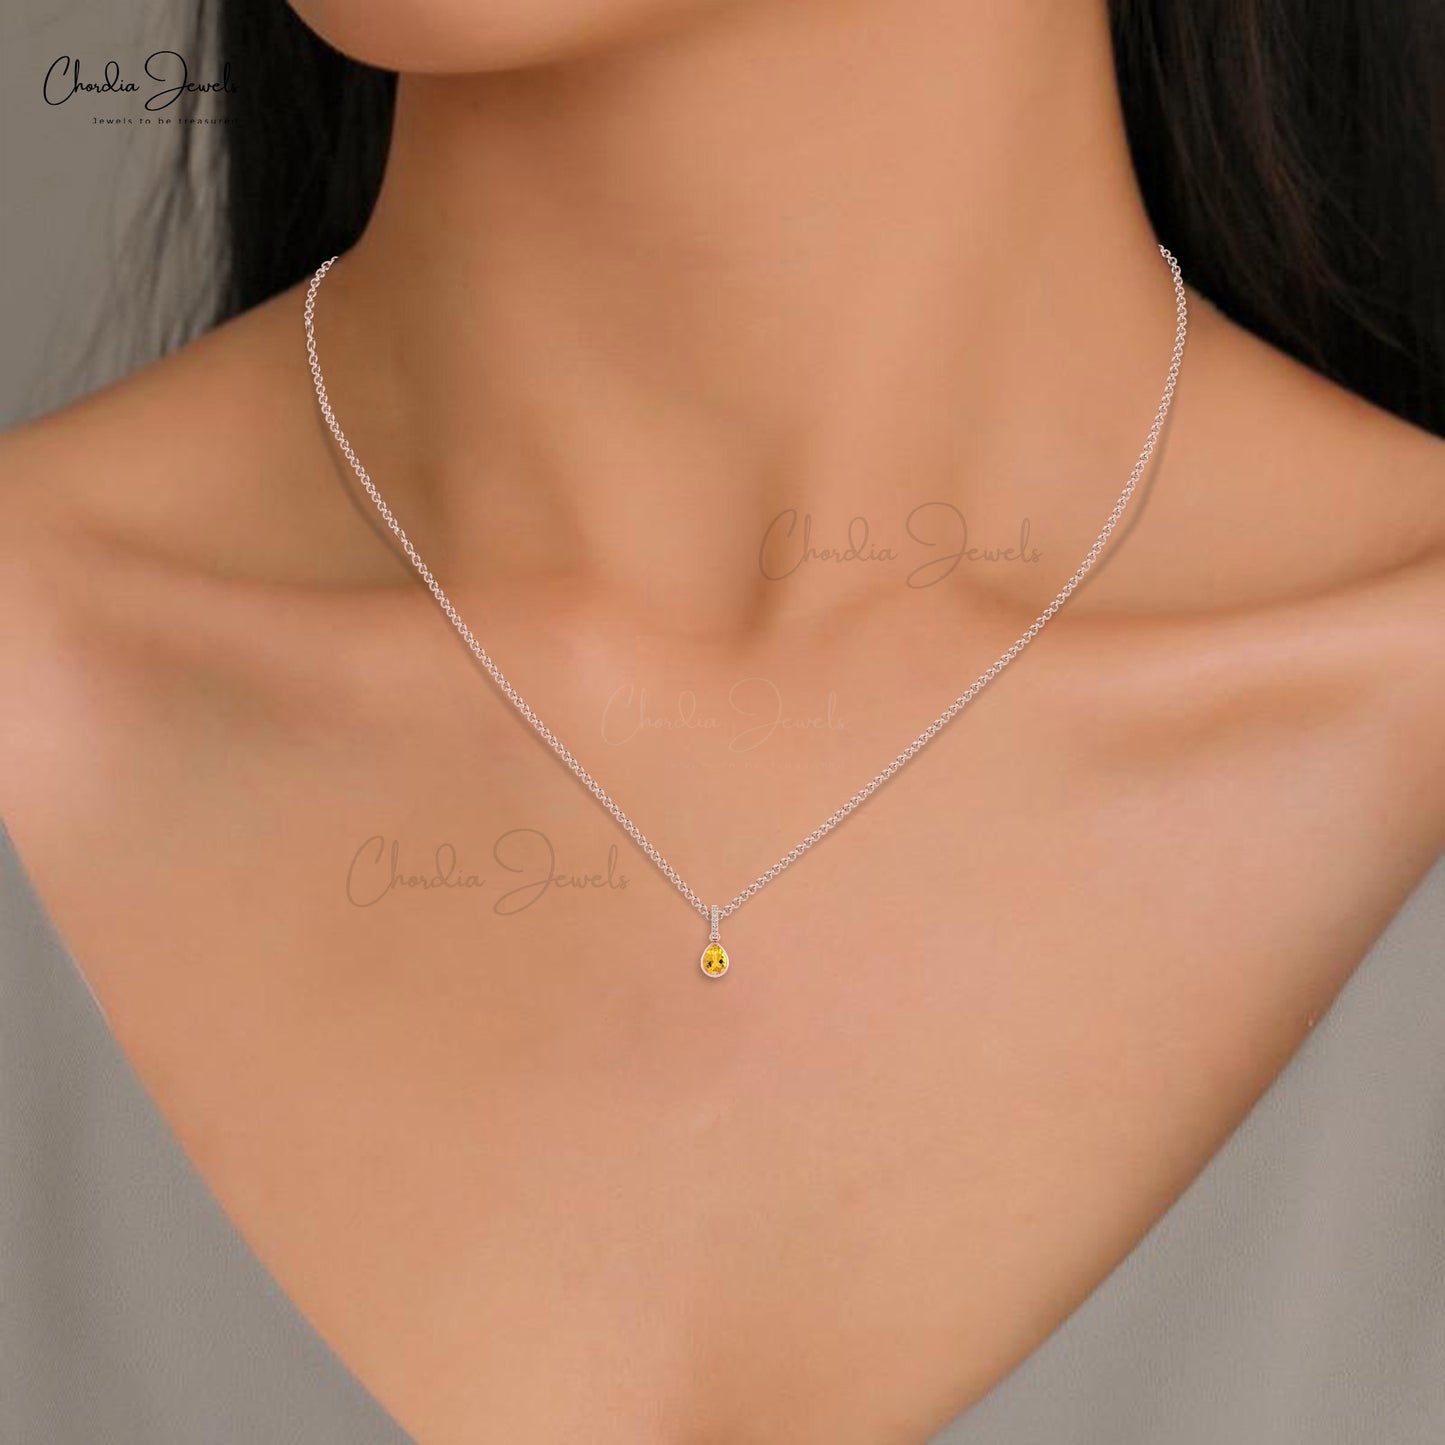 Exquisite Natural White Diamond Drop Pendant Necklace 8x6mm Pear Shape Yellow Citrine Gemstone Pendant in 14k Solid Gold Bridesmaid Gift